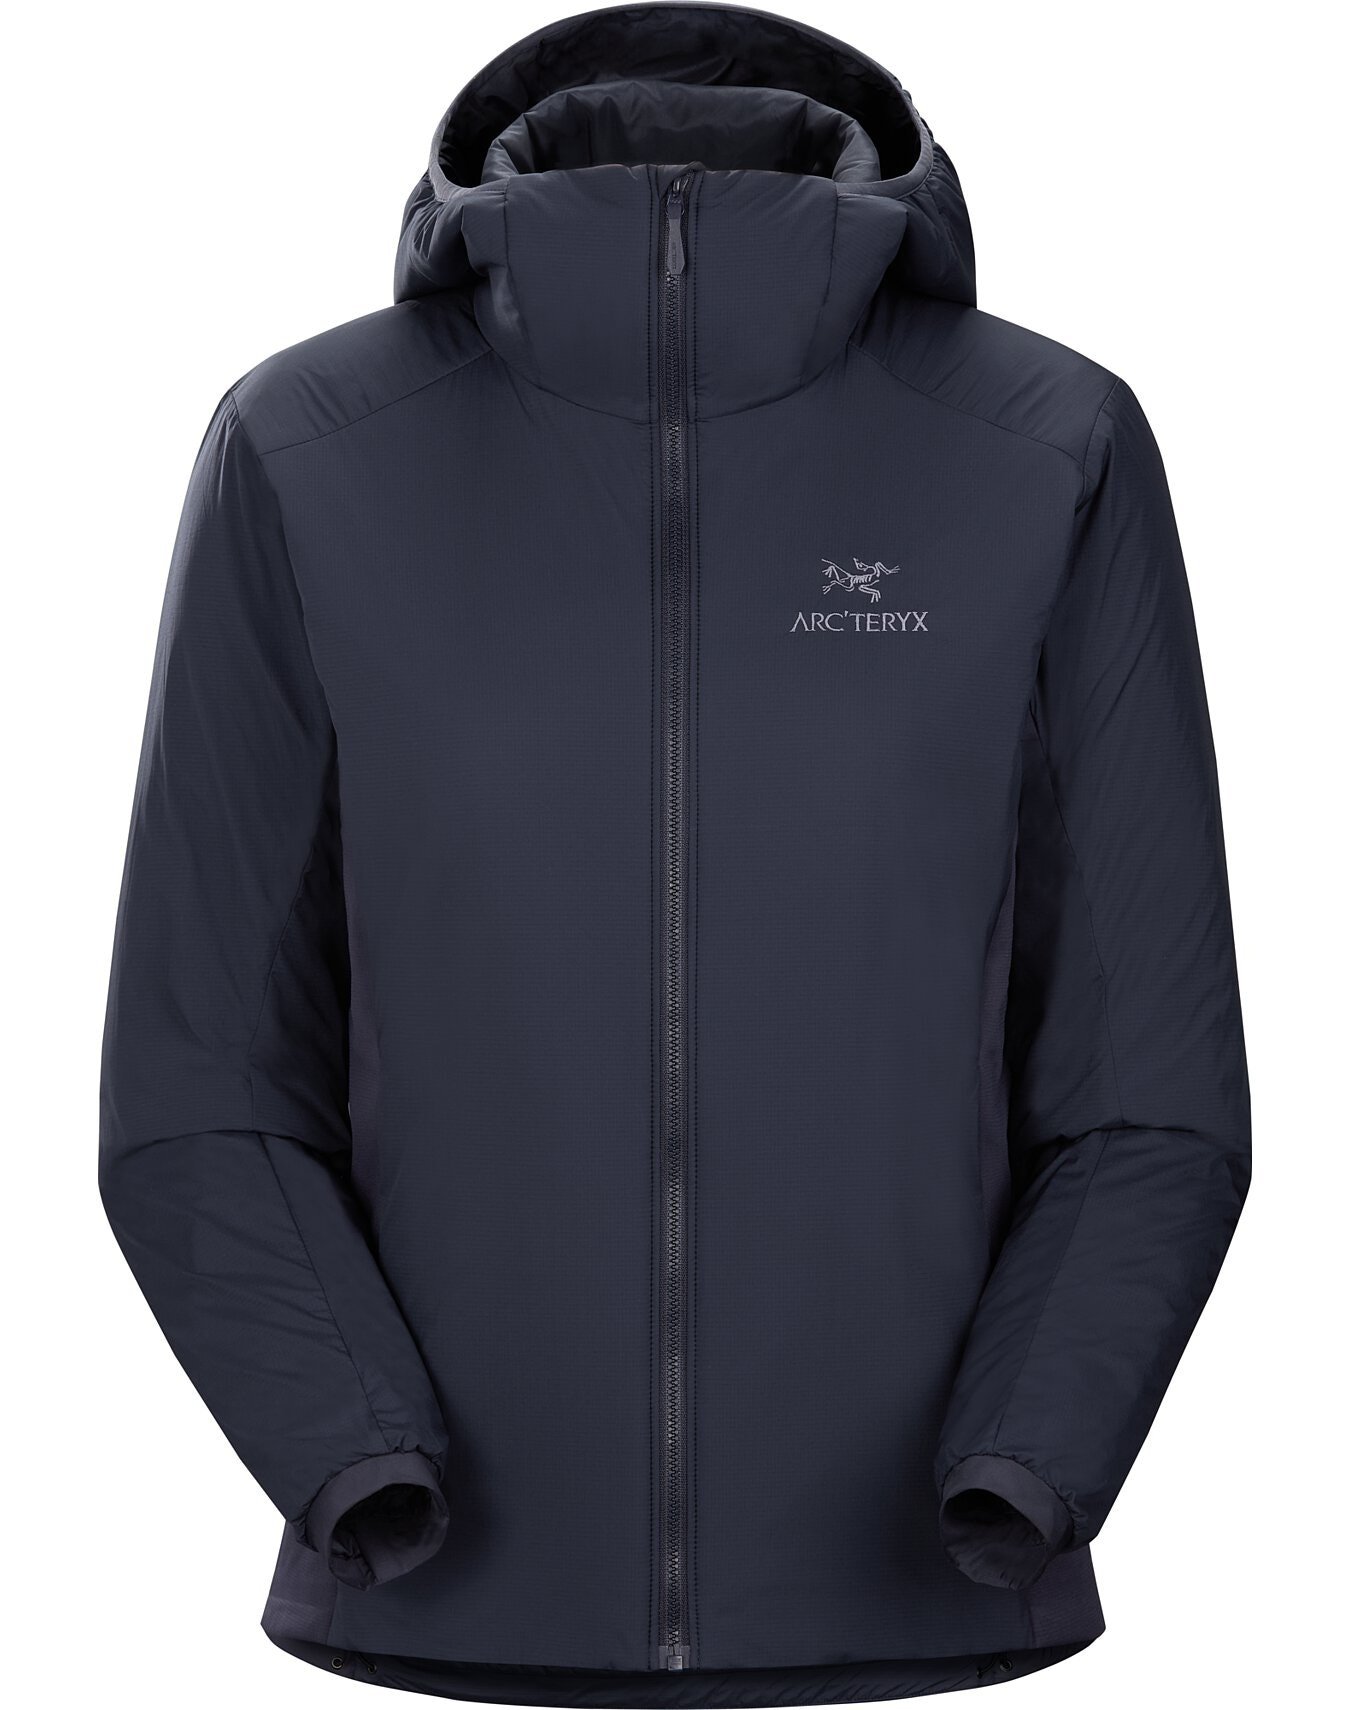 W's Atom Hoody - The Guides Hut